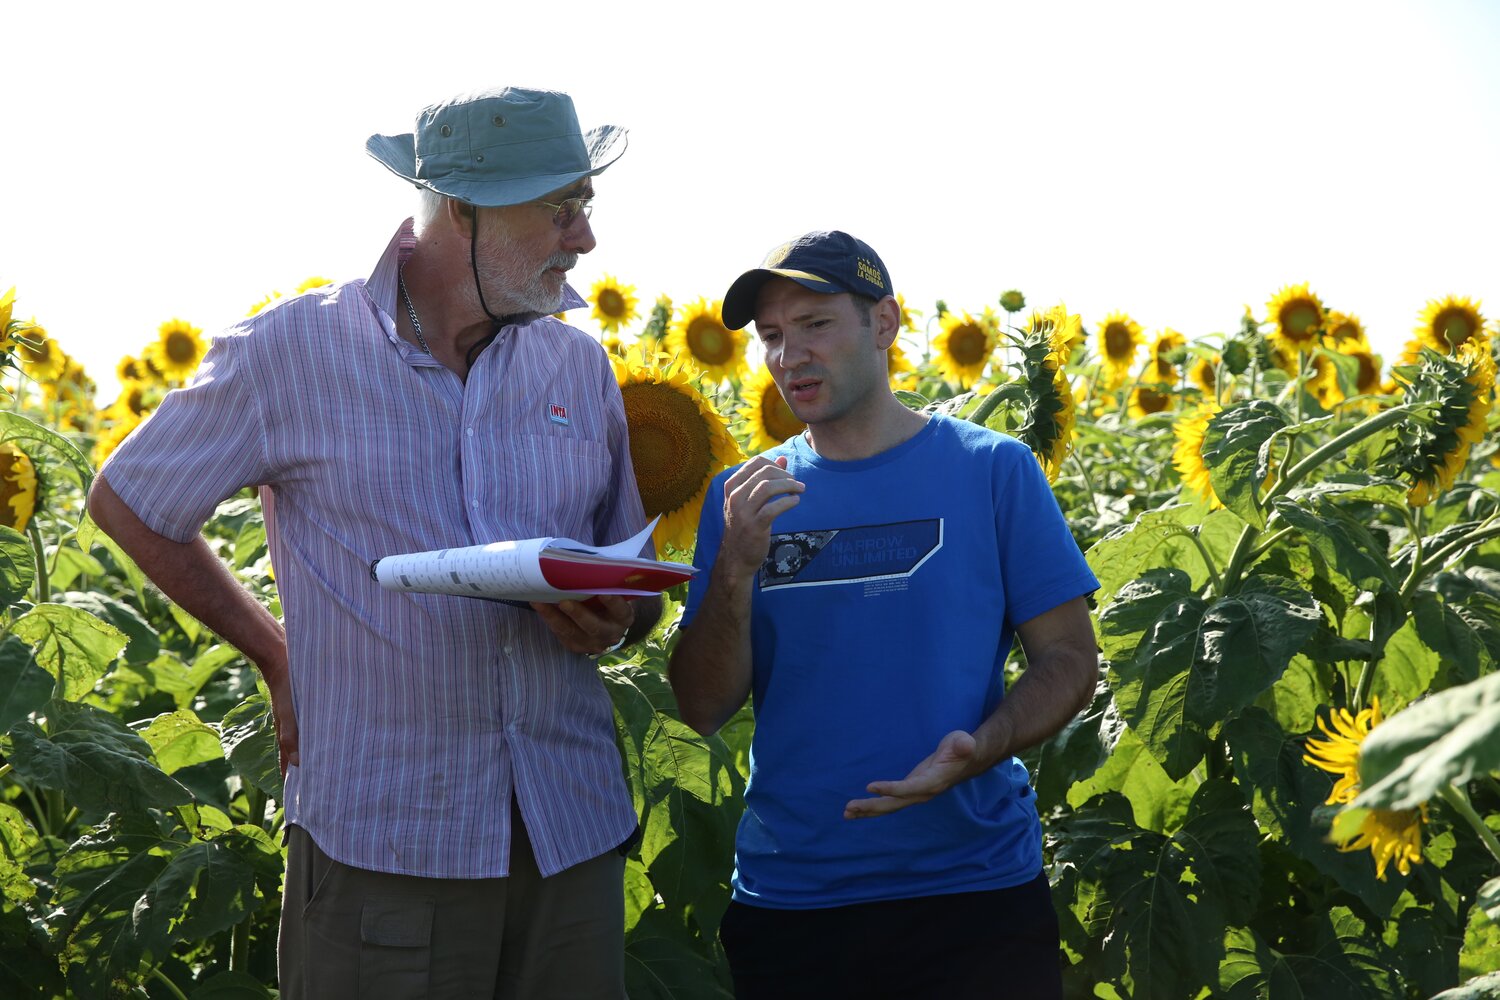 Day 4: In the afternoon, we visited a Crop Wild Relatives trial site near General Pico, where our INTA partners are evaluating the resistance of crosses between wild and elite sunflowers to stem canker. Pictured here, renowned INTA sunflower breeder Daniel Alvarez (left) talks with PhD candidate Denis Colombo (INTA Anguil-Conicet), who is studying the variability of causal agents of stem canker. Daniel is also responsible for INTA’s sunflower genebank.